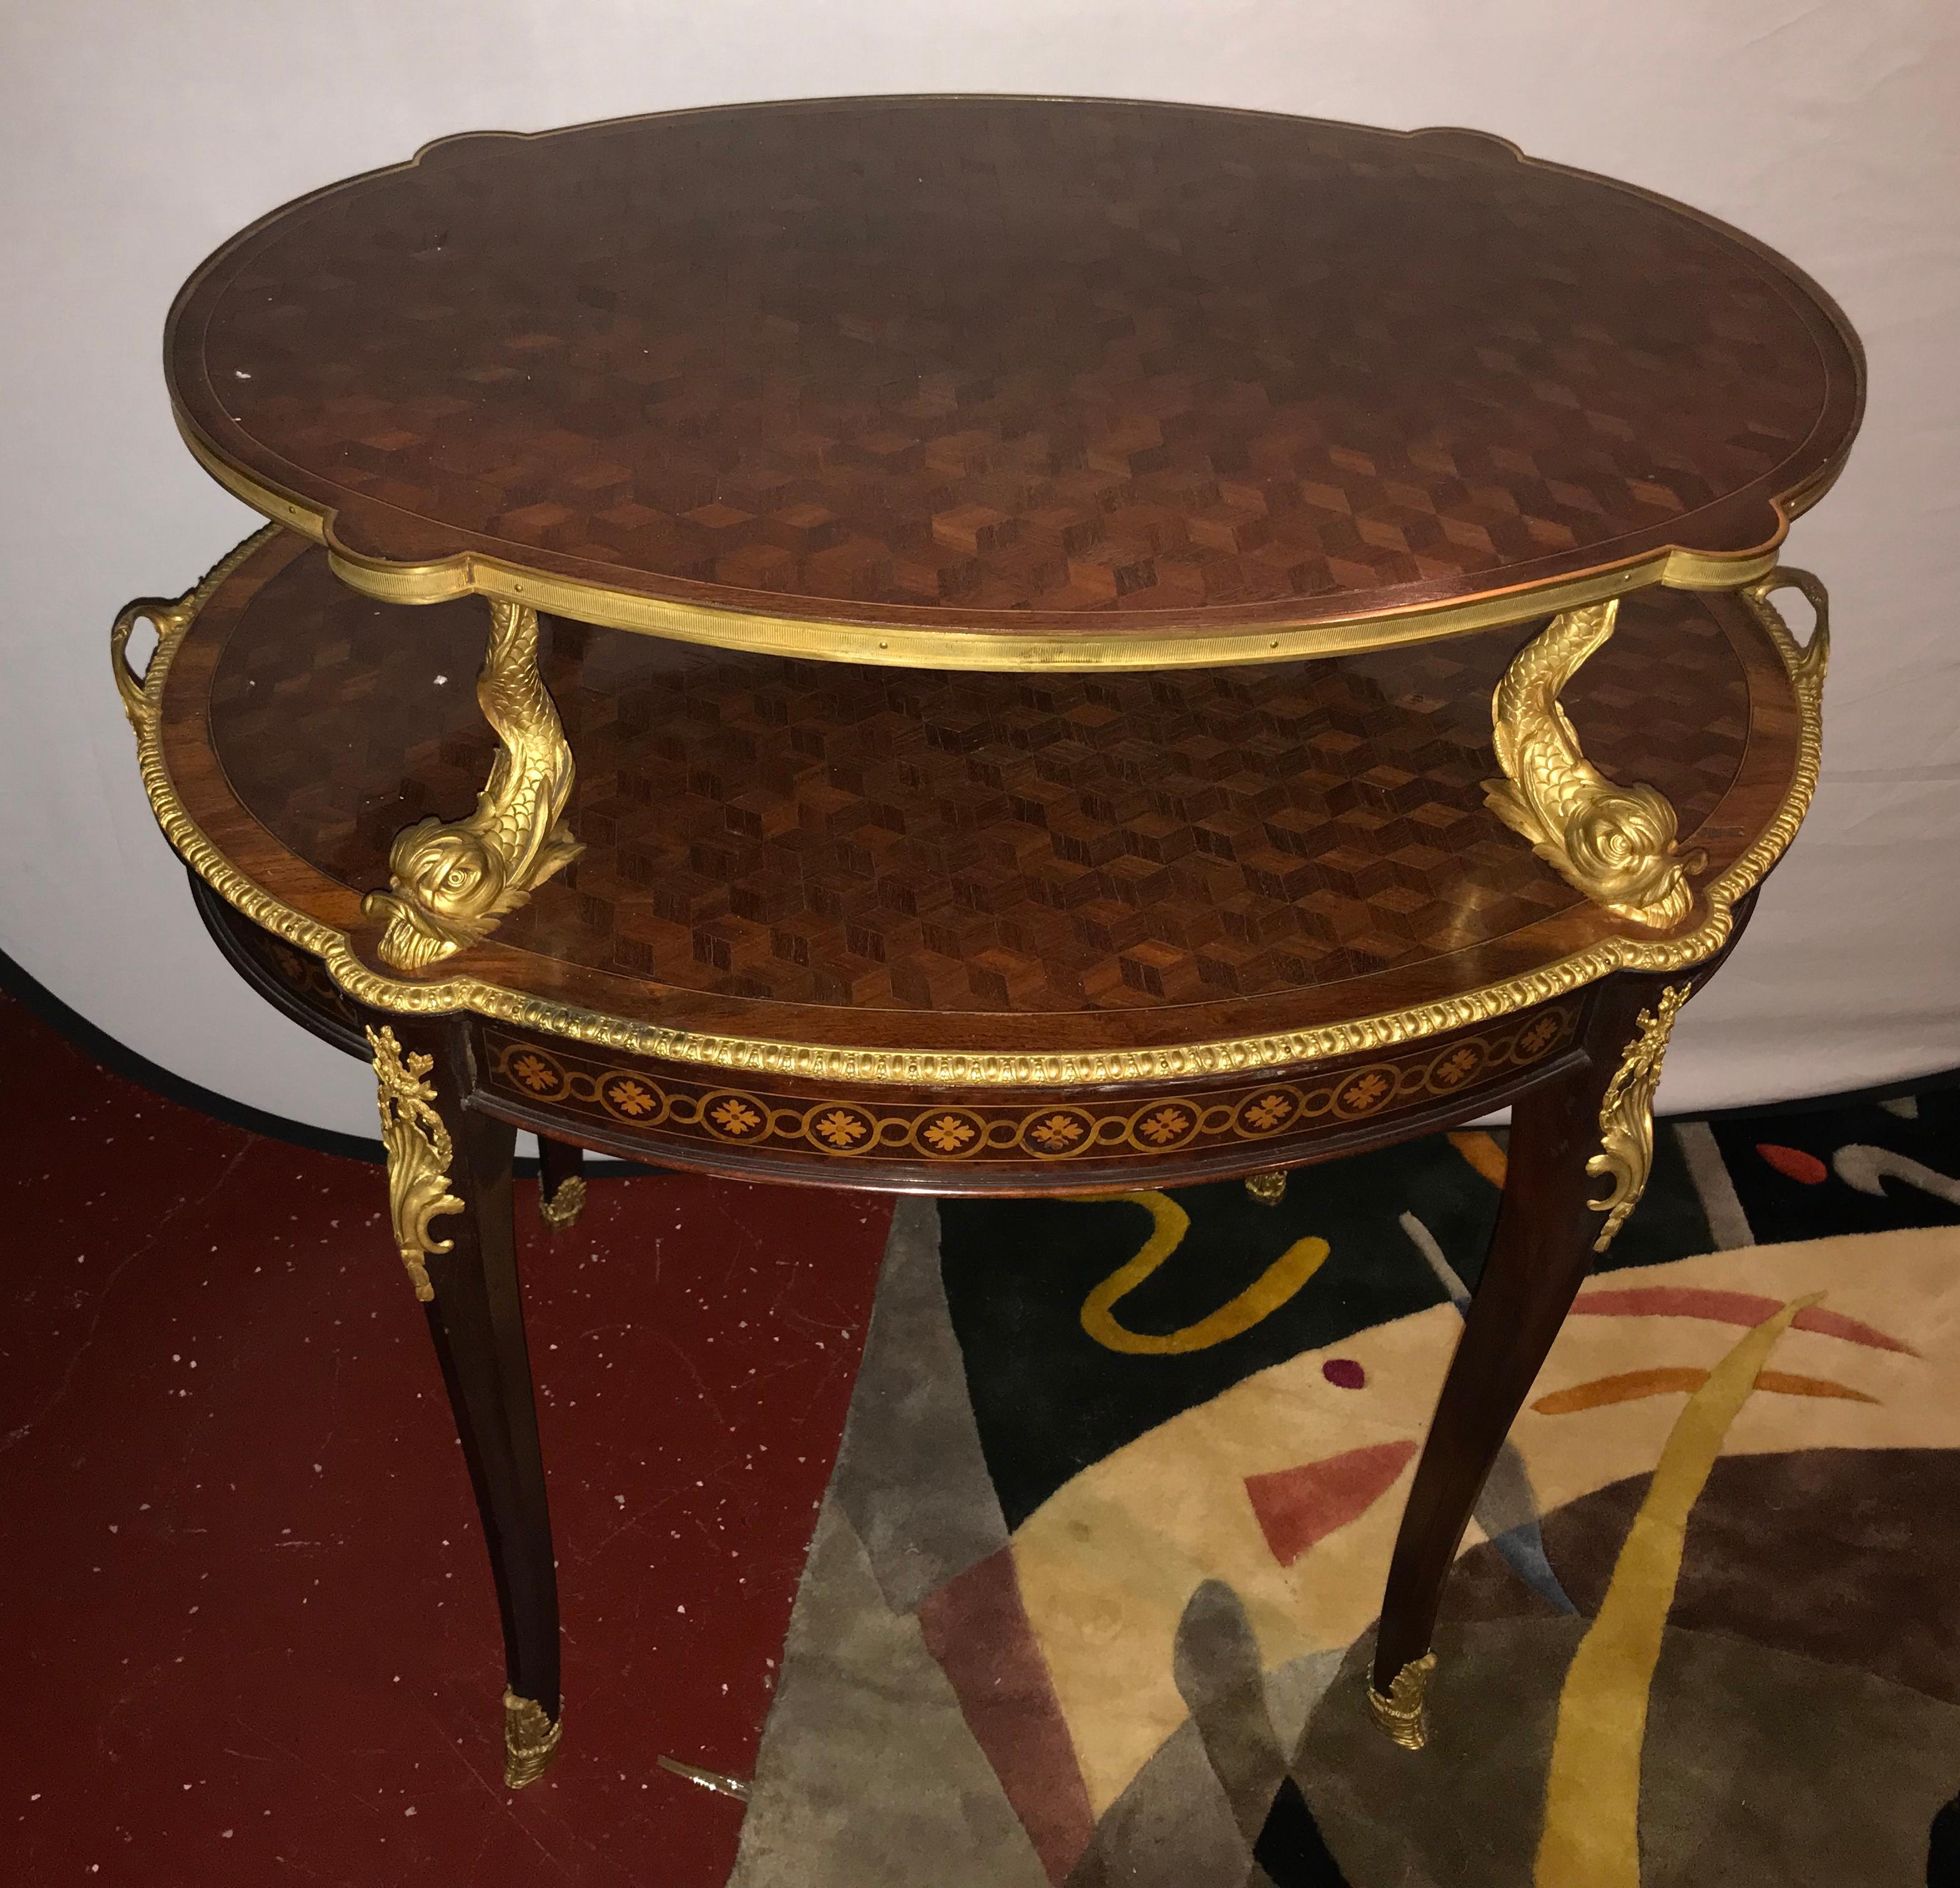 A Louis XVI style doré bronze figural mounted deseret two-tier serving stand. This finely cast late 19th-early 20th century serving table is simply the finest quality in regards to casting and finish. The full bodied dolphins separating the two